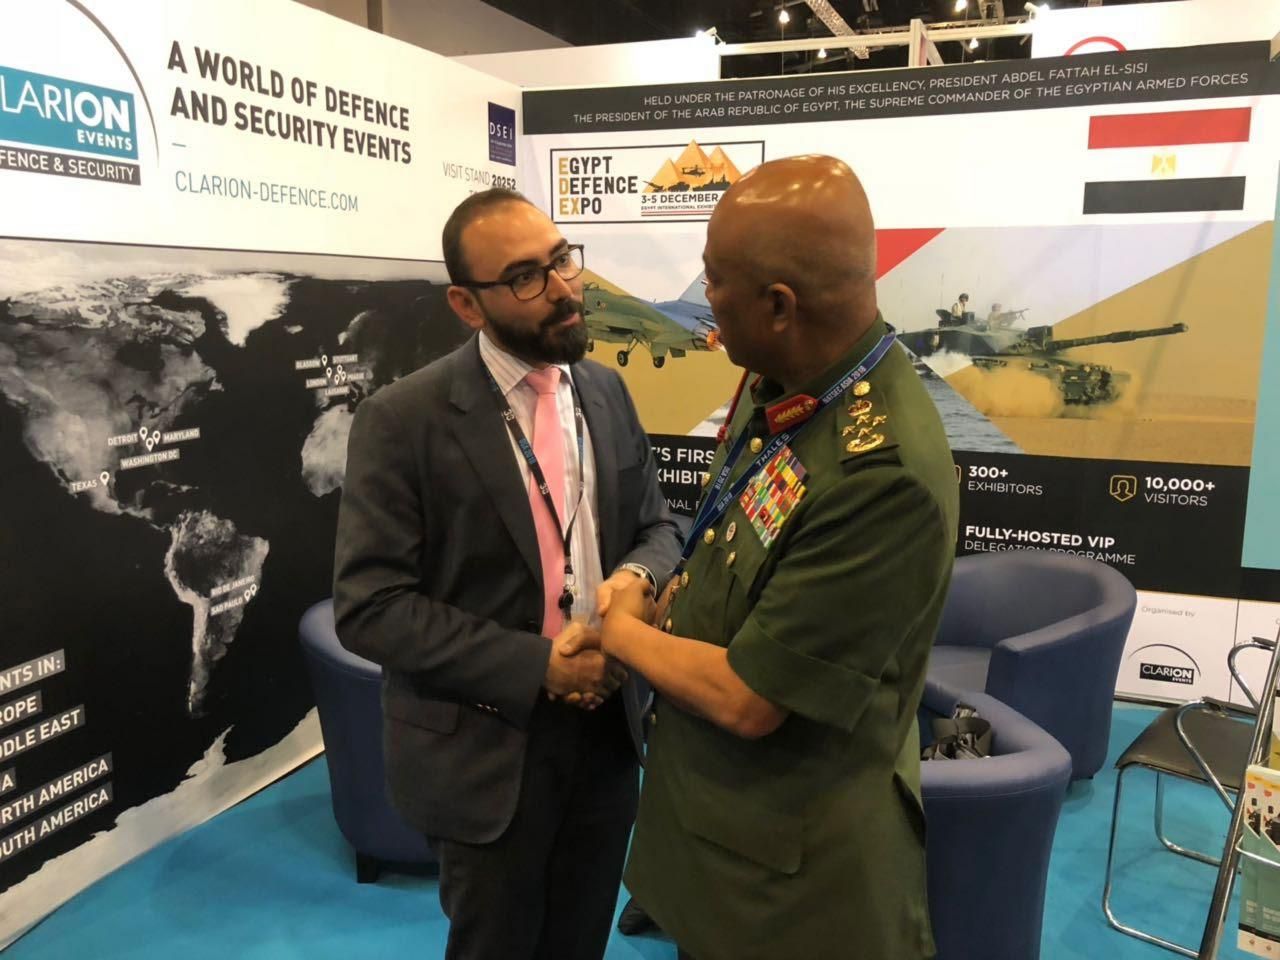 Malaysian Chief of Defence Forces visits EDEX Stand at DSA